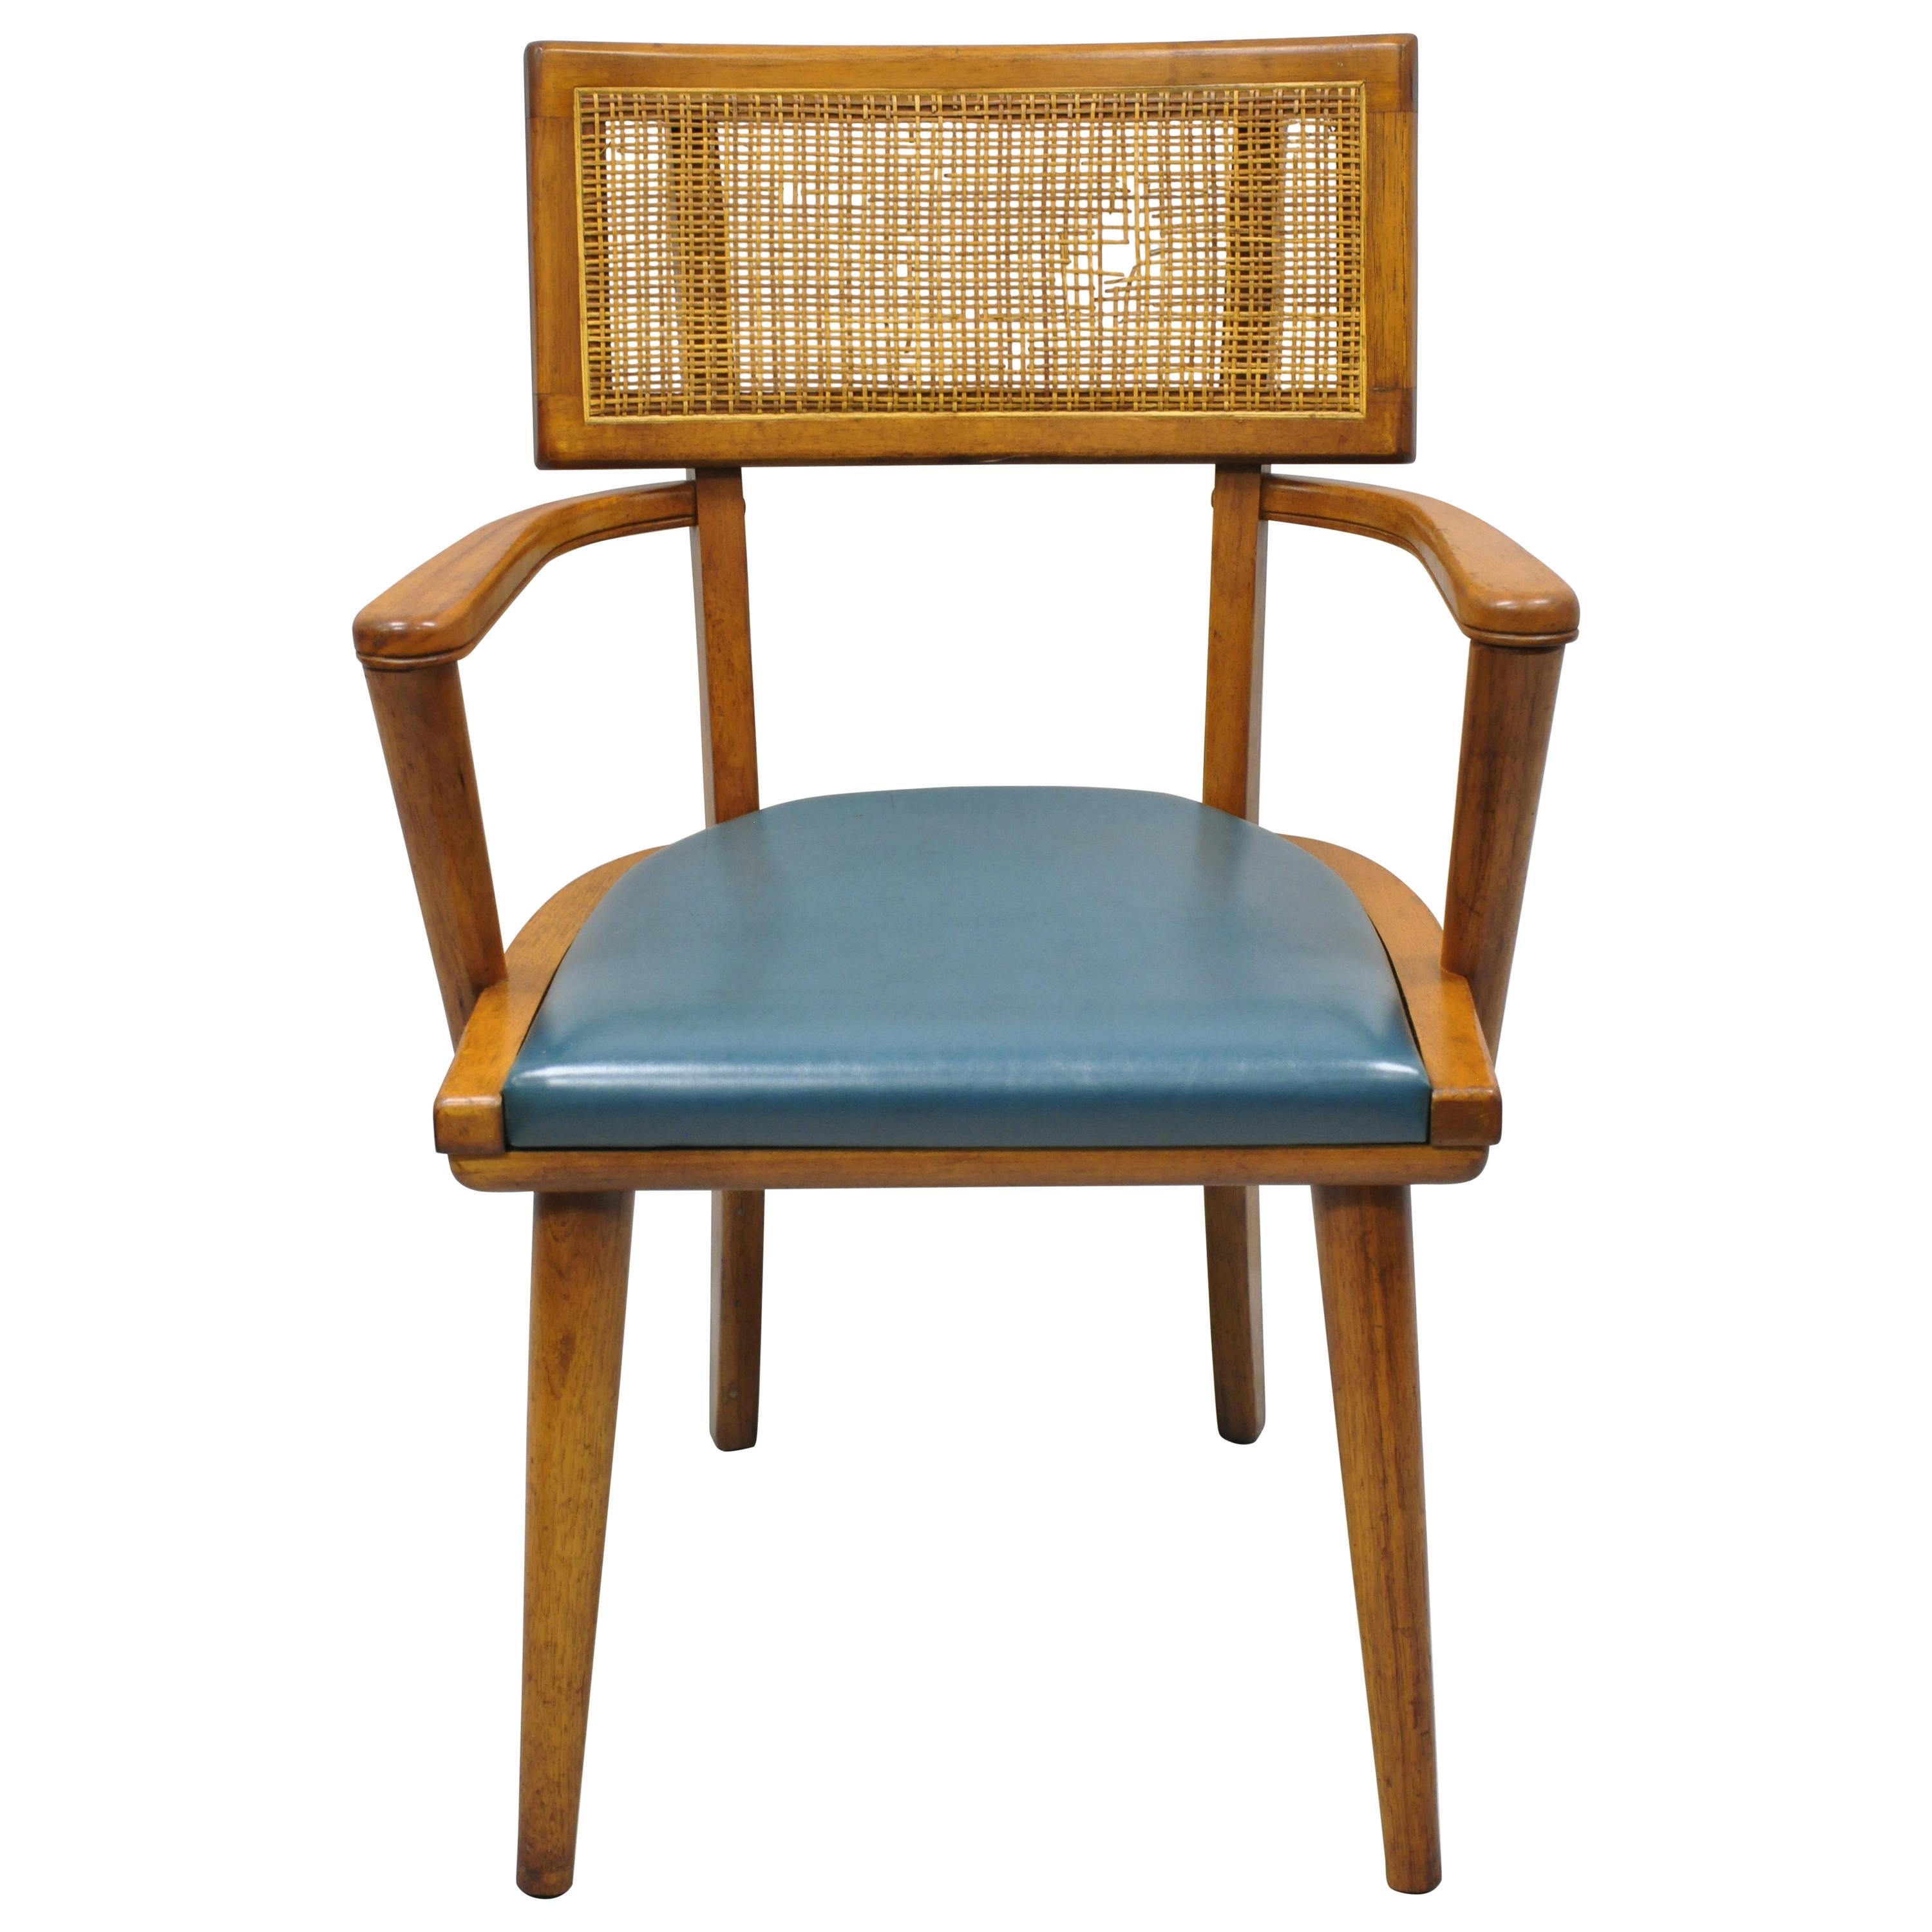 The Boling Changebak Chair Walnut Cane Back Mid Century by Boling Chair Co. 'A'